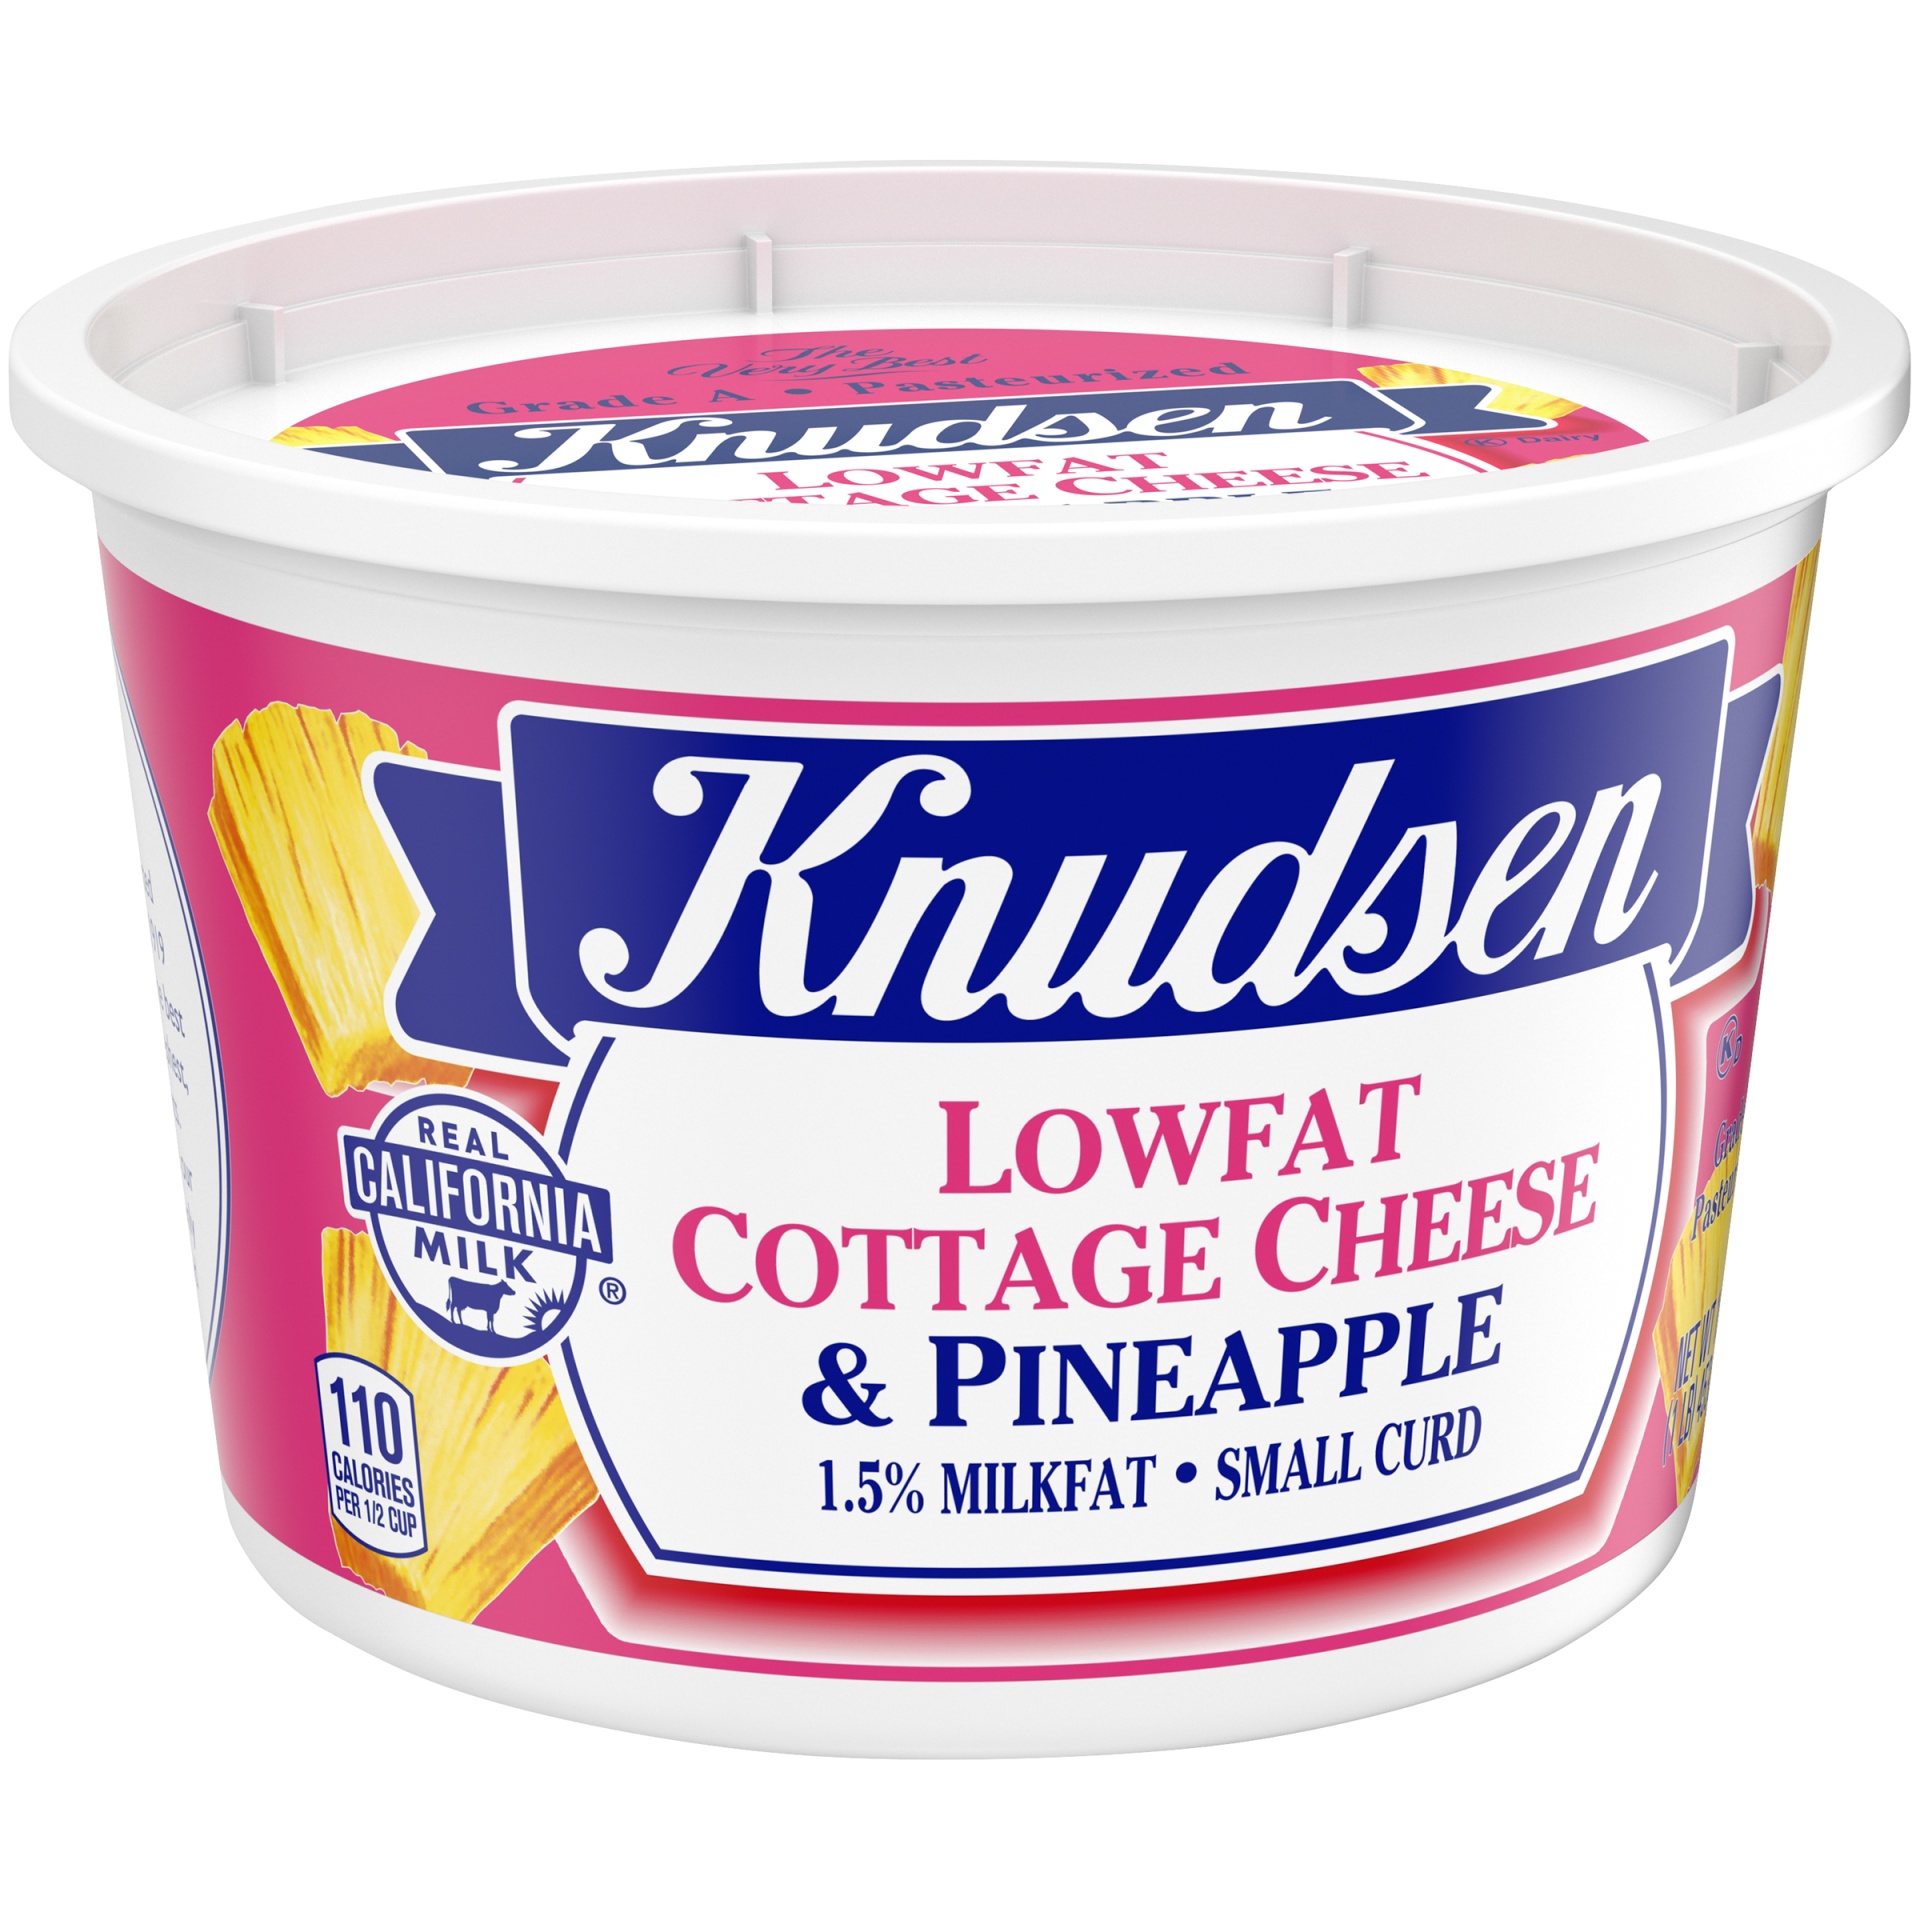 slide 2 of 6, Knudsen Lowfat Small Curd Cottage Cheese & Pineapple with 1.5% Milkfat Tub, 16 oz